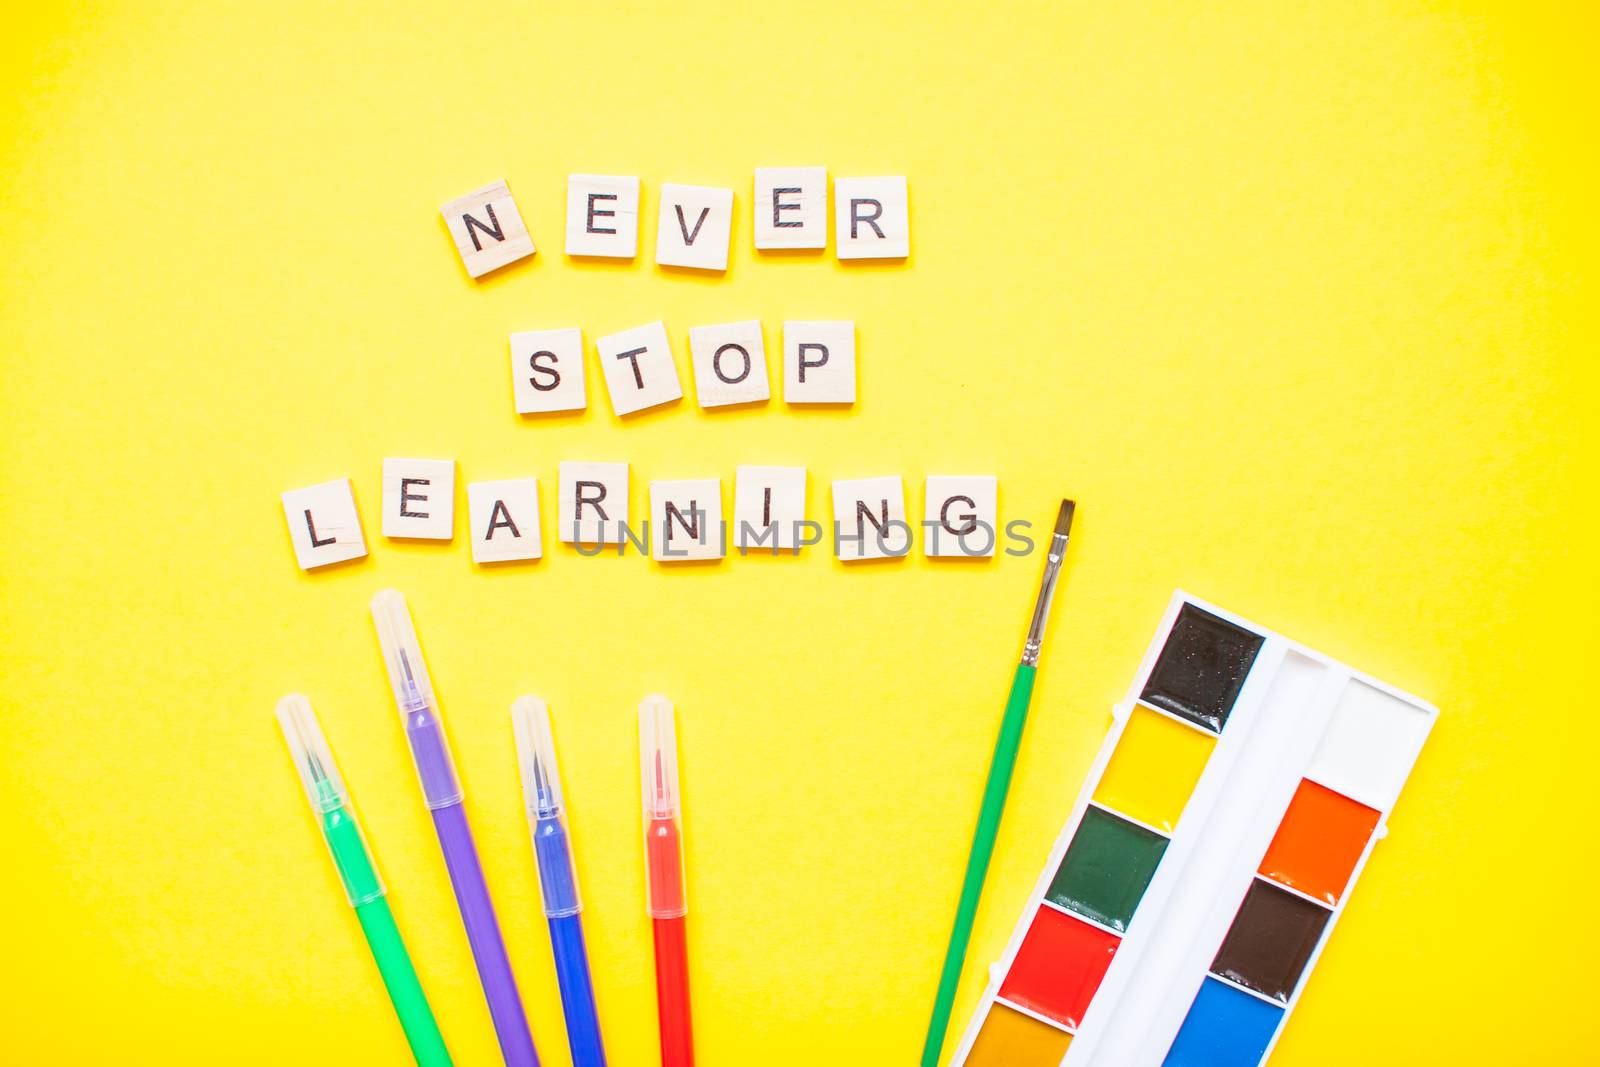 Words from wooden blocks "never stop learning" and stationery by malyshkamju